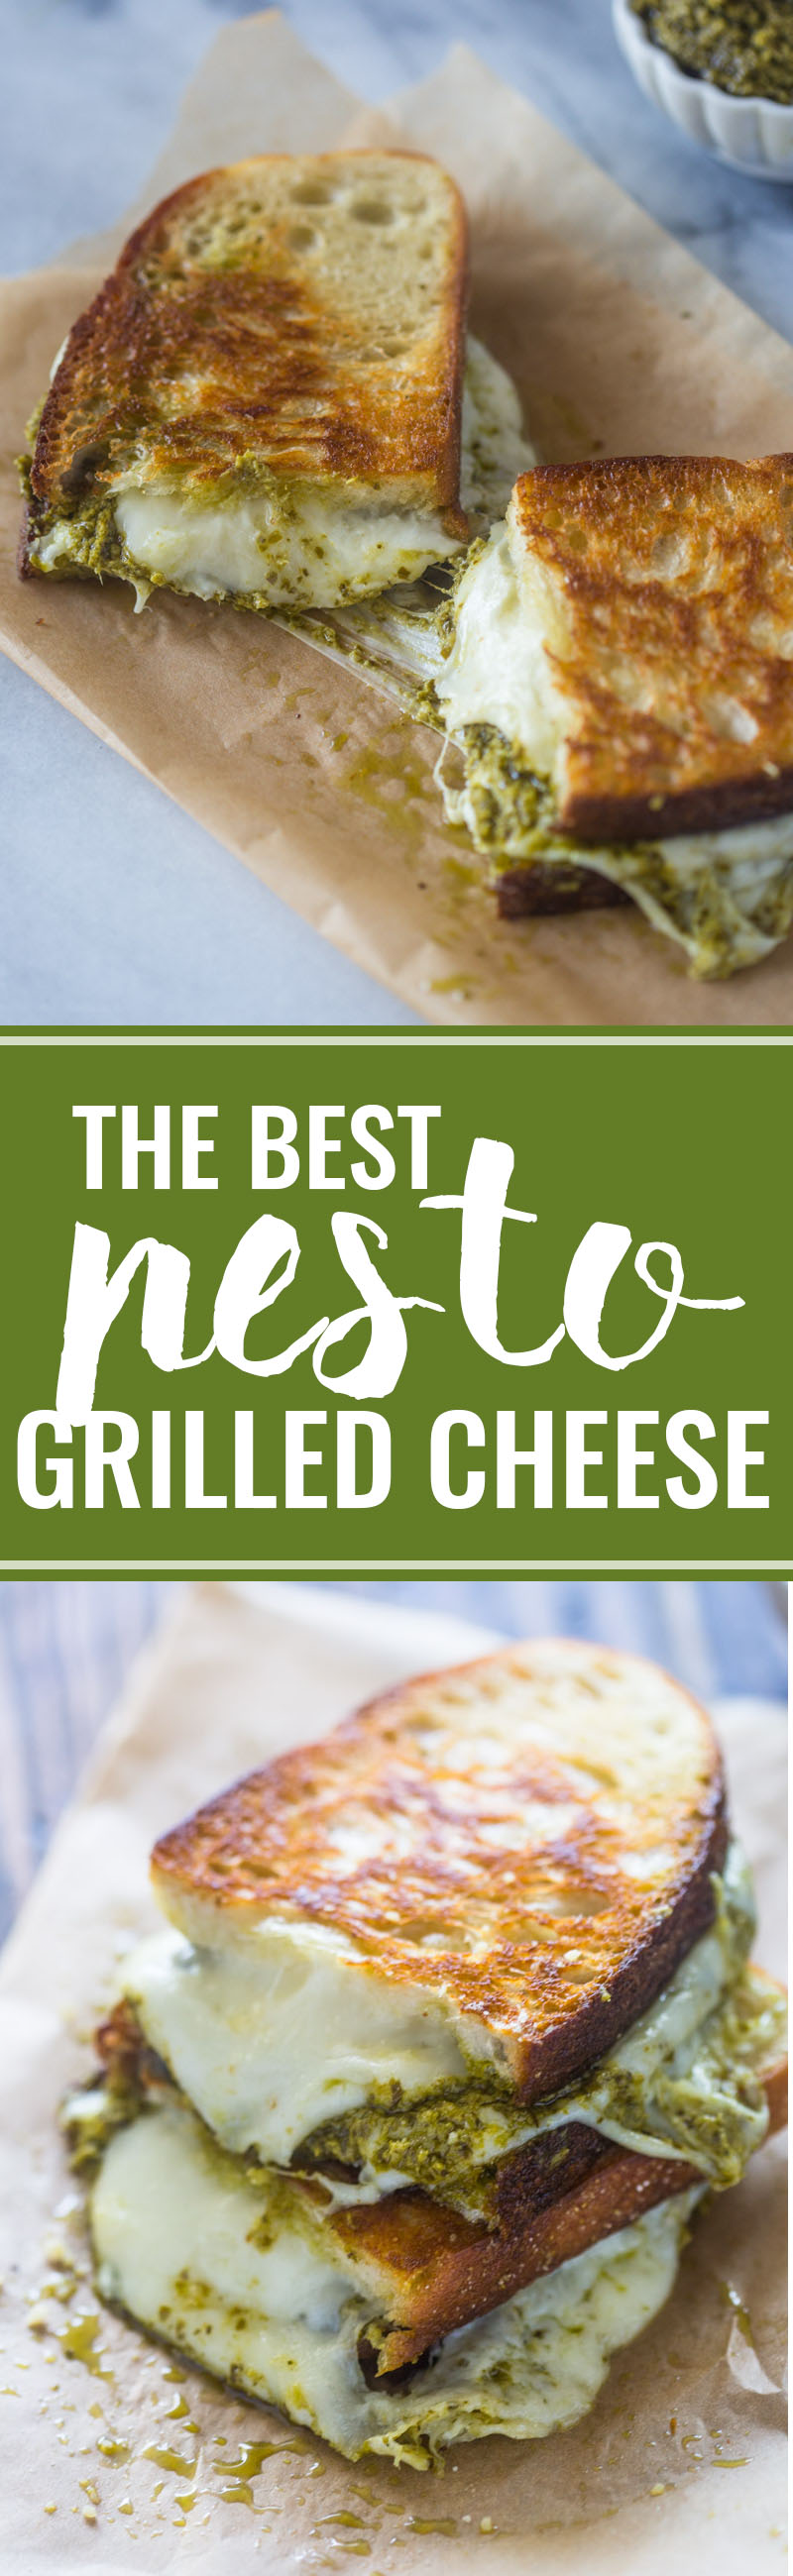 The Best Pesto Grilled Cheese